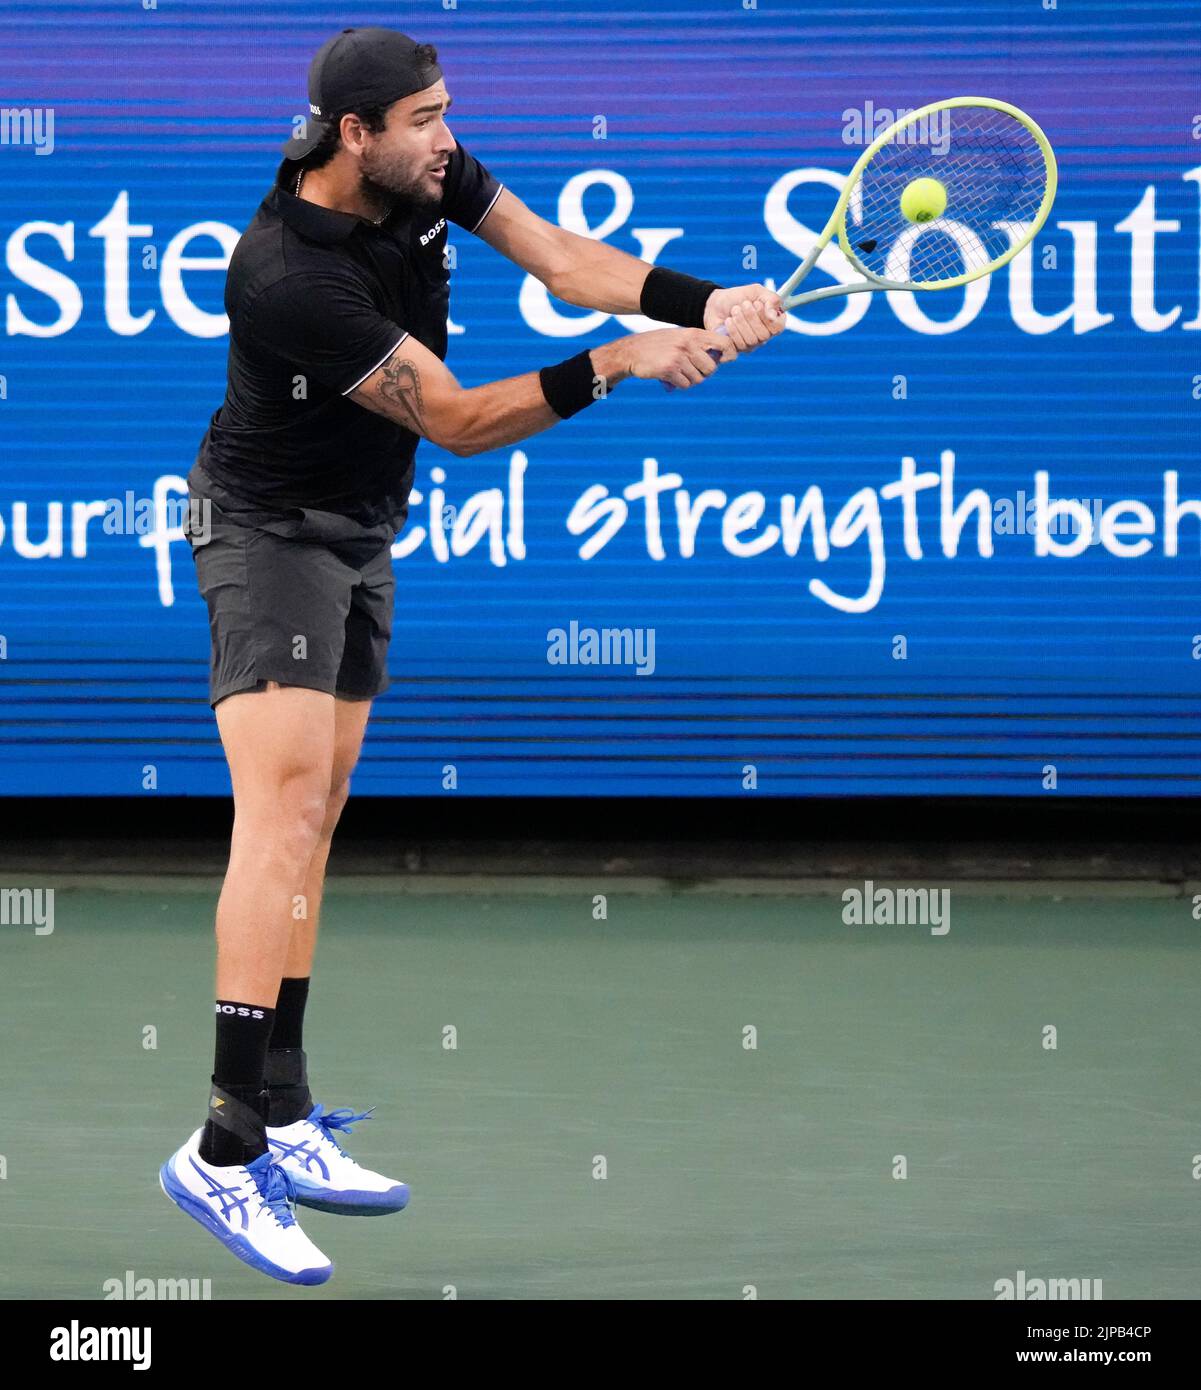 August 15, 2022: Matteo Berrettini (ITA) loses to Frances Tiafoe (USA), 7-6, 6-4 7-6 at the Western & Southern Open being played at Lindner Family Tennis Center in Cincinnati, Ohio, {USA} © Leslie Billman/Tennisclix/Cal Sport Media Stock Photo